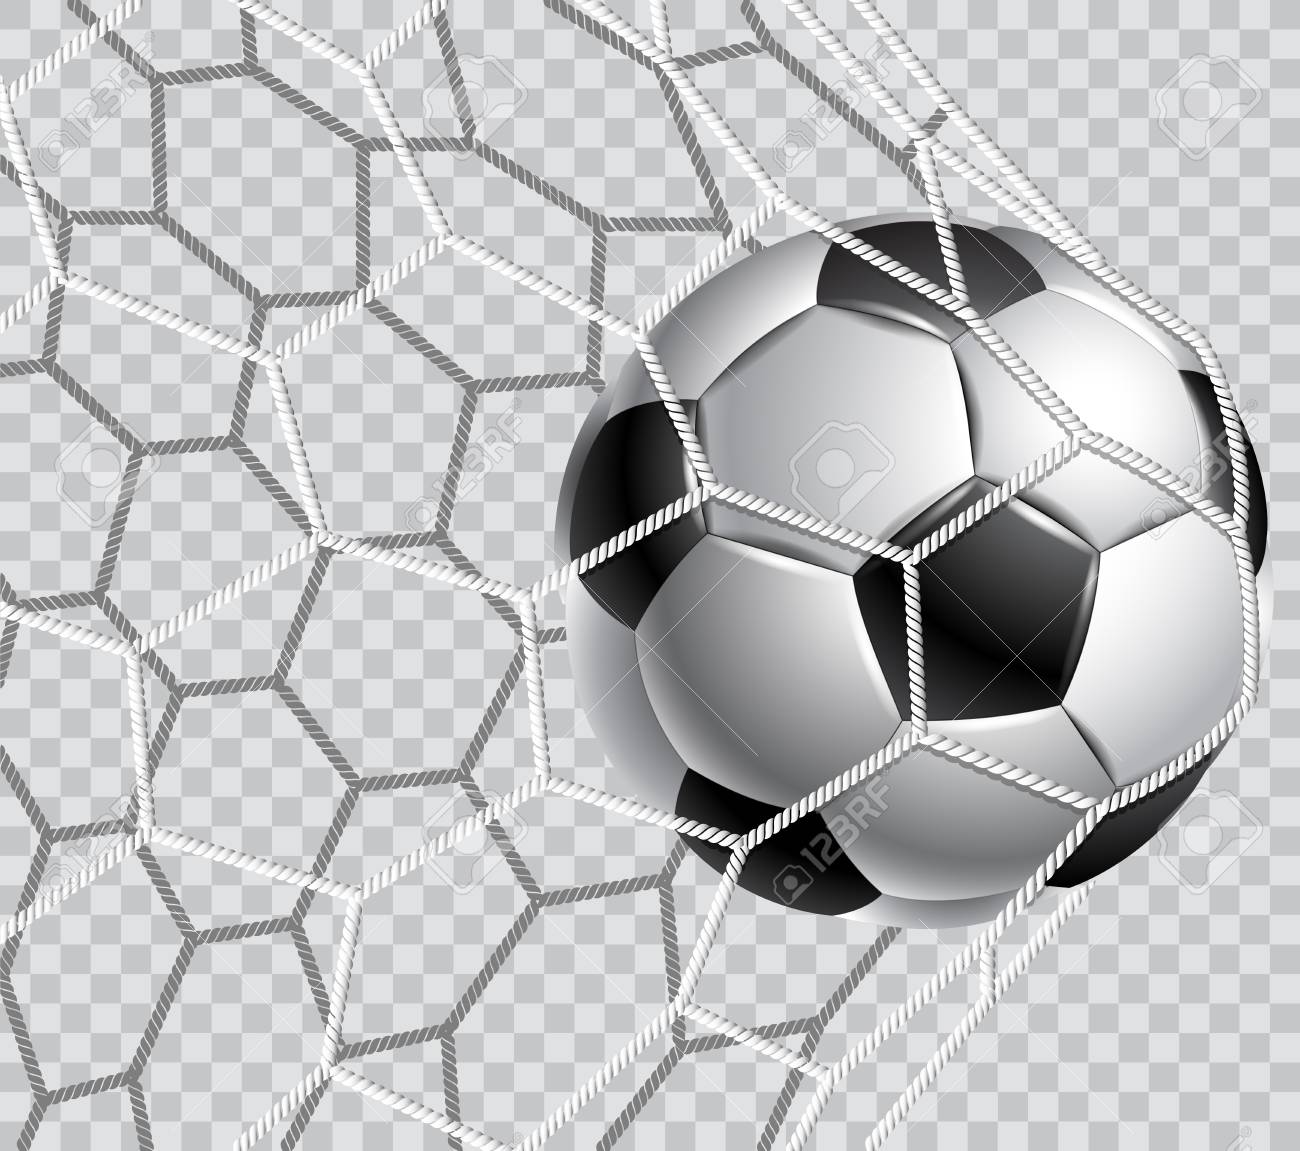 Png Soccer Ball In A Grid On Transparent